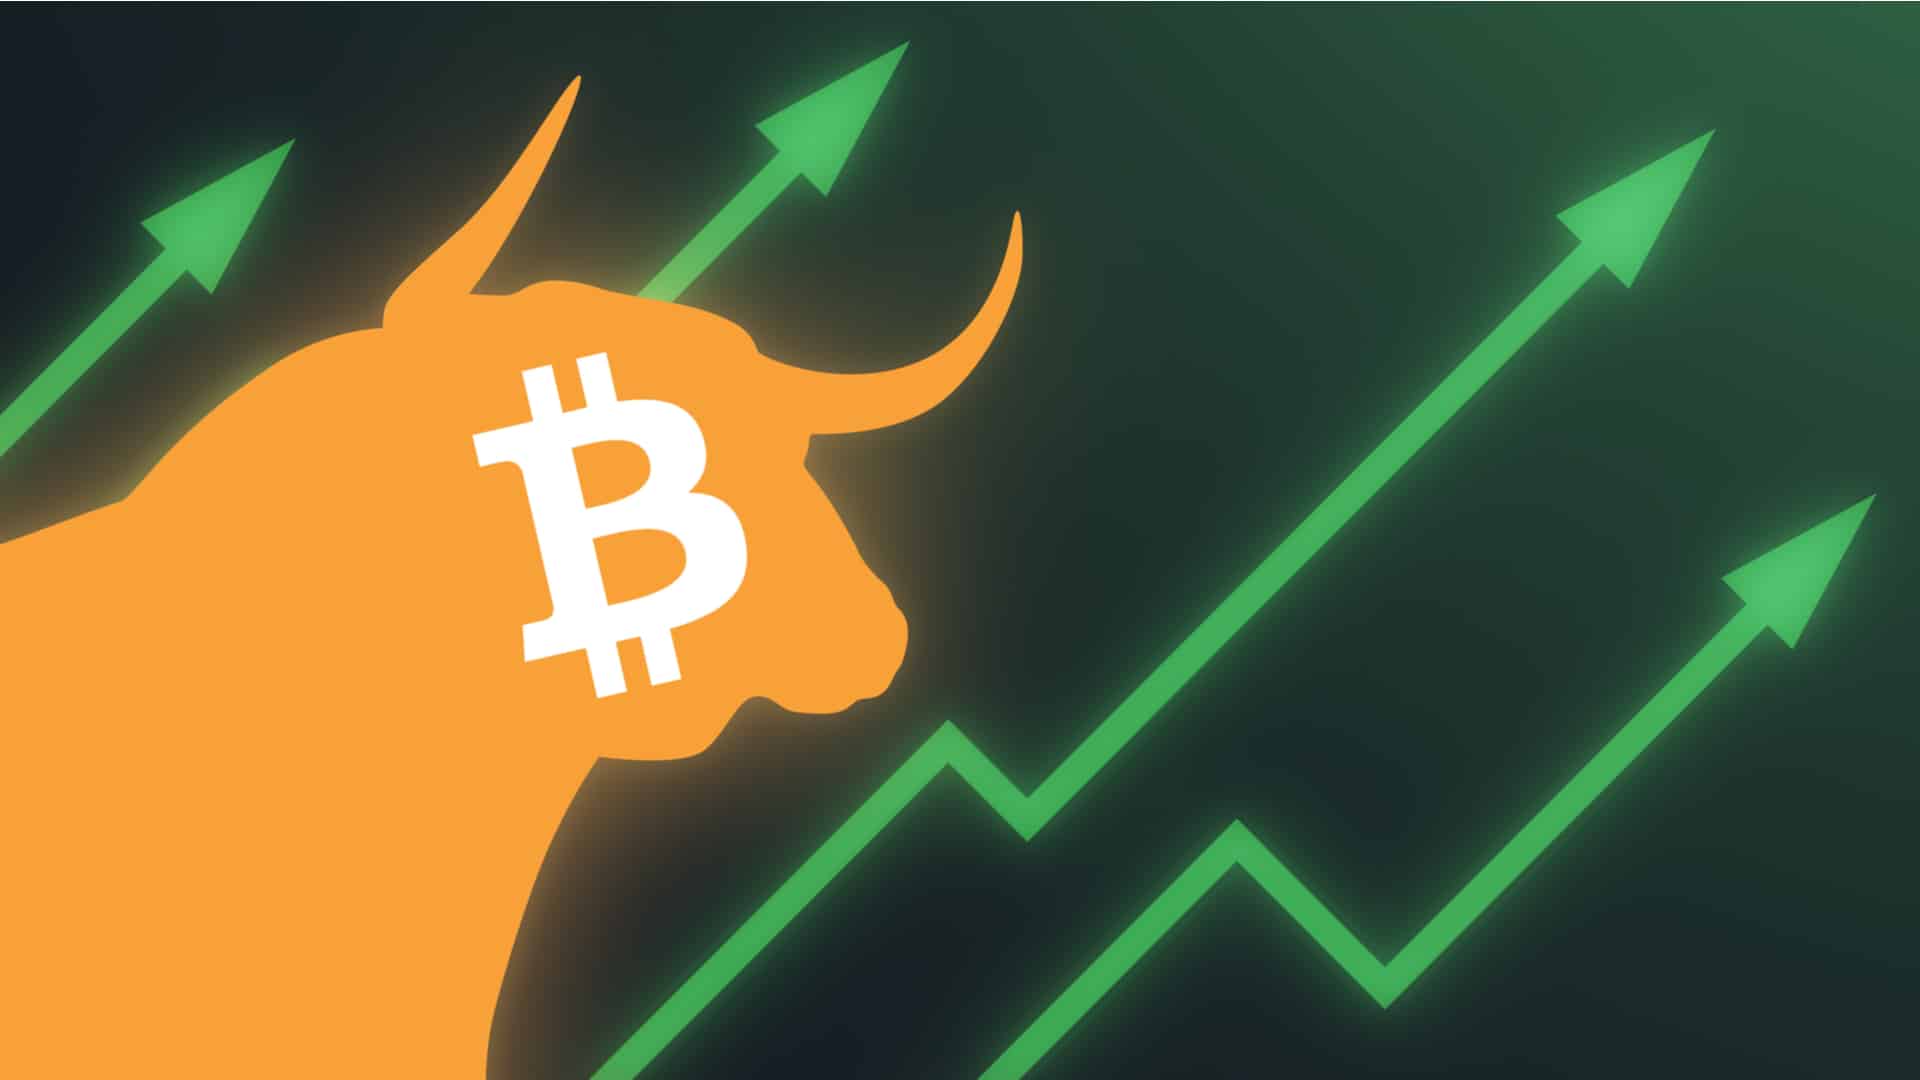 The exact historical phenomenon suggests that BTC is waiting for a big pump during October!